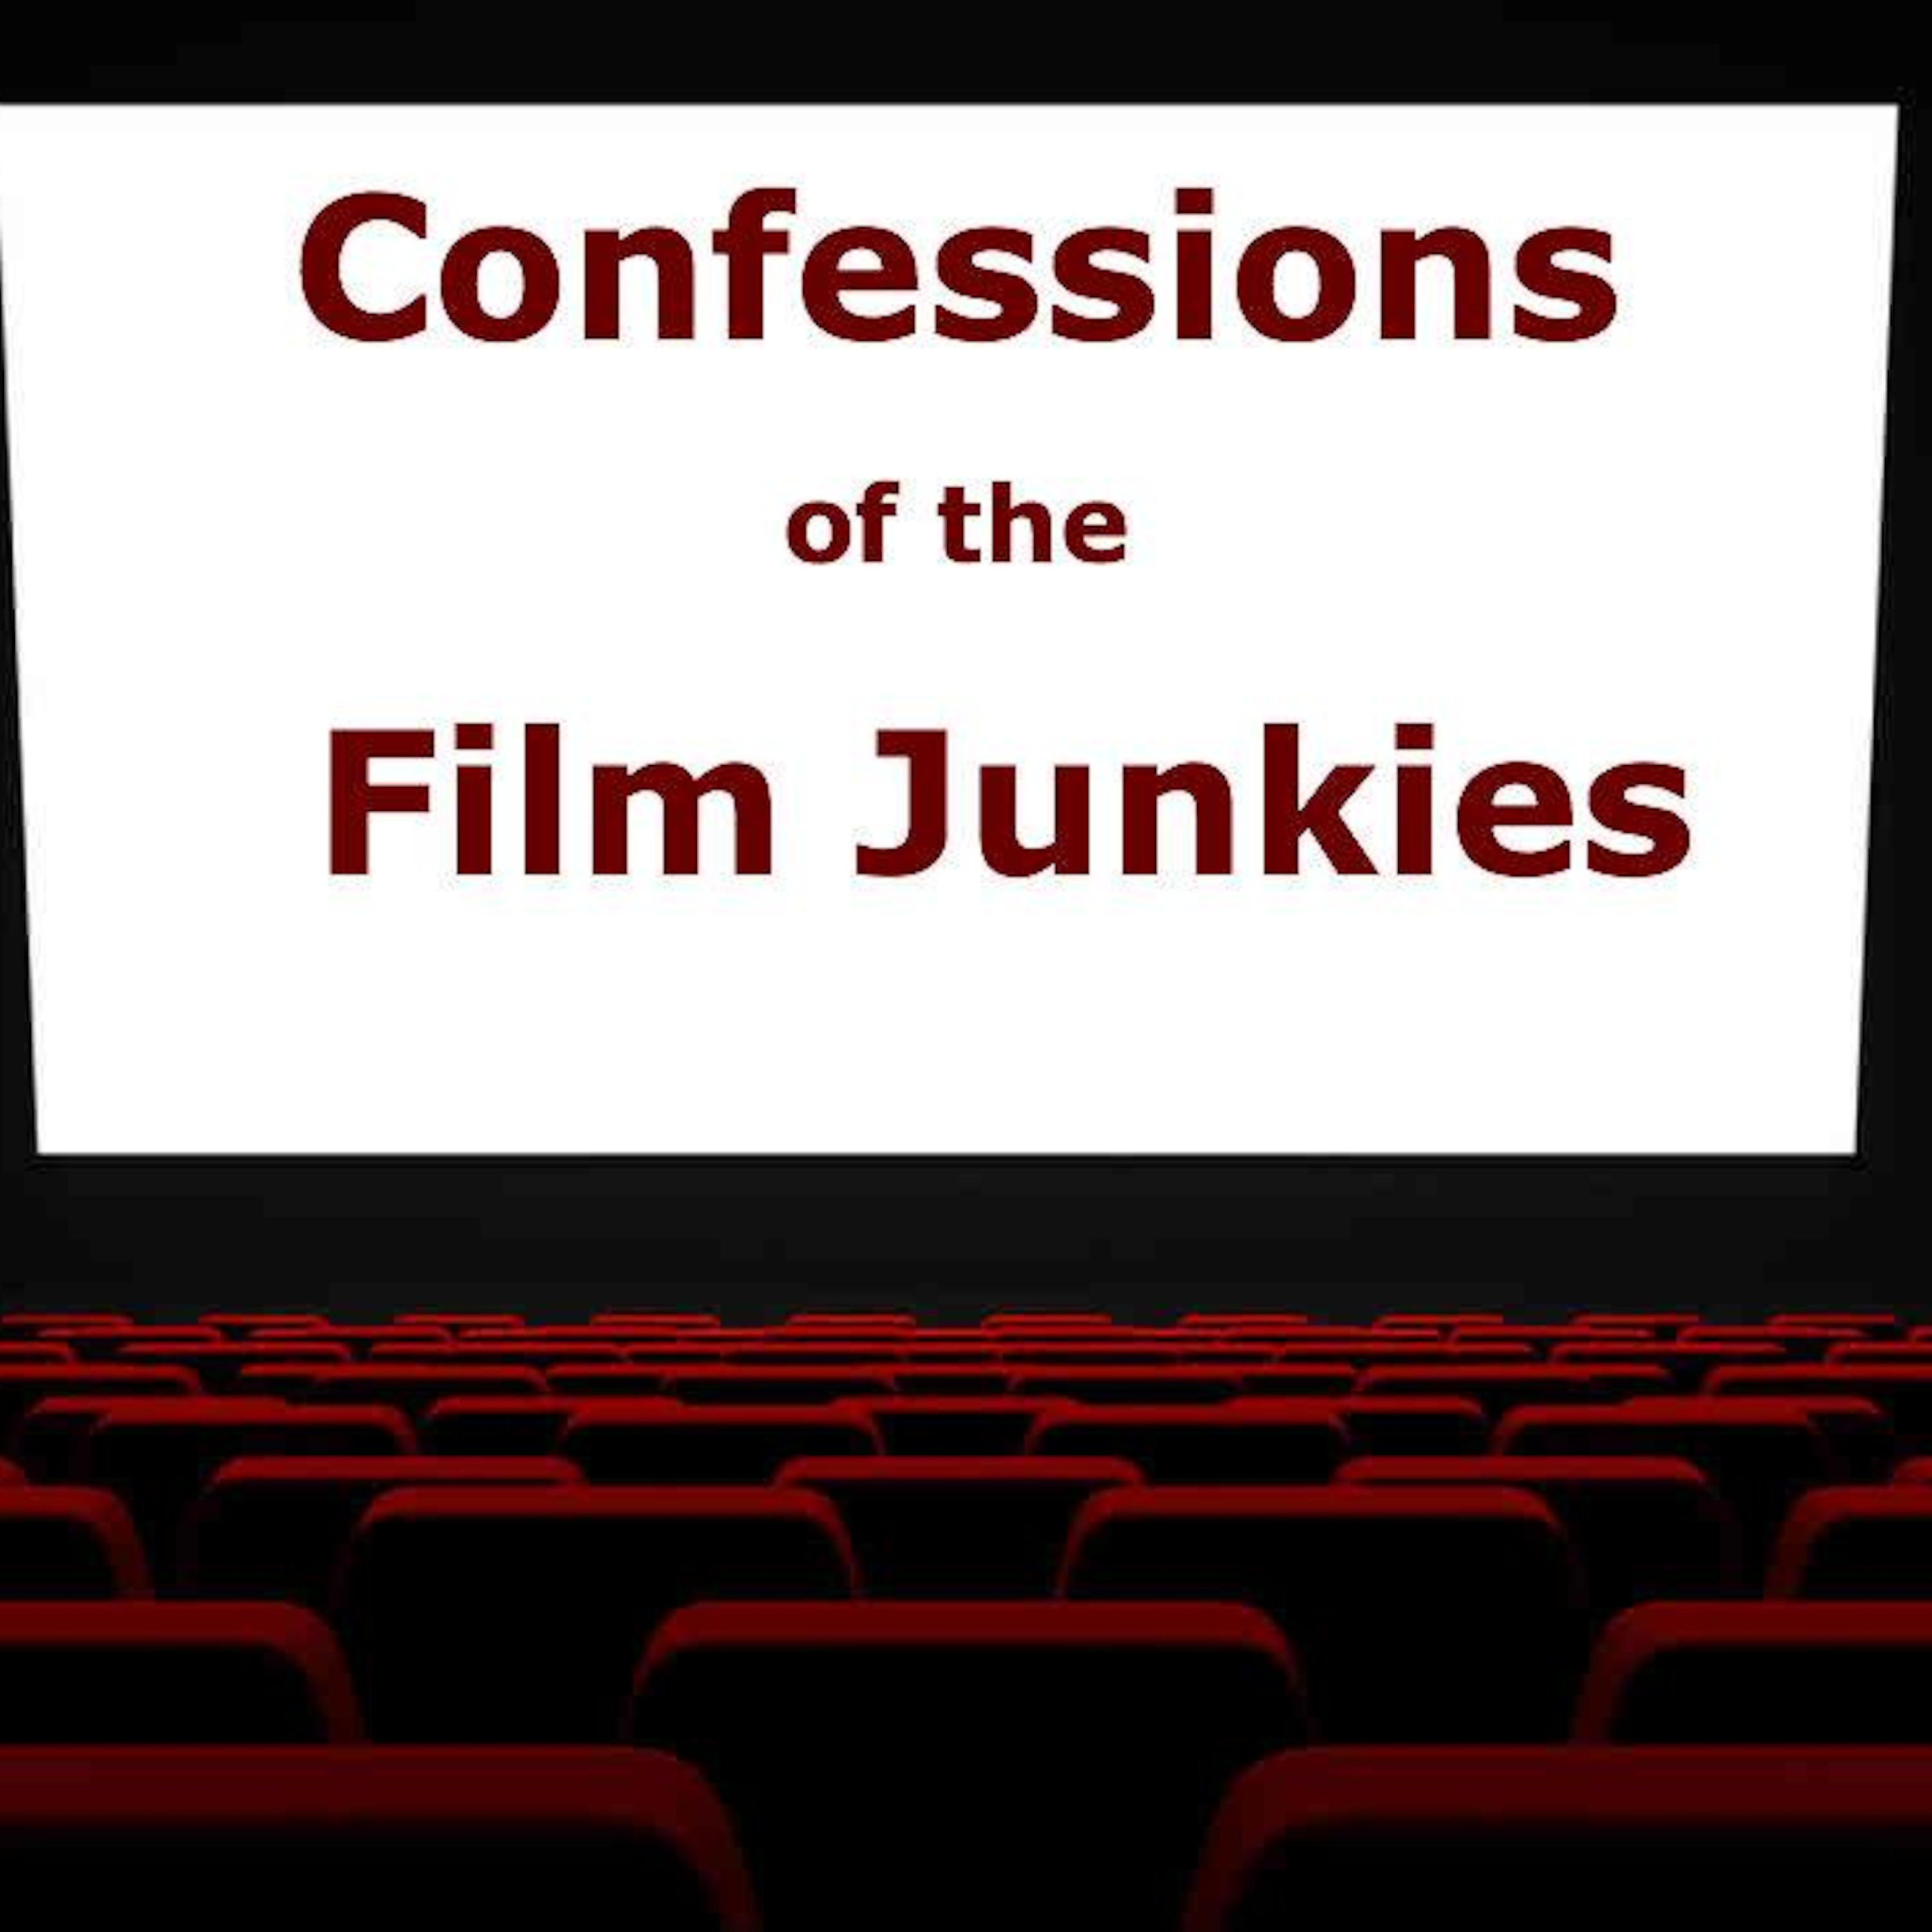 Confessions of the Film Junkies